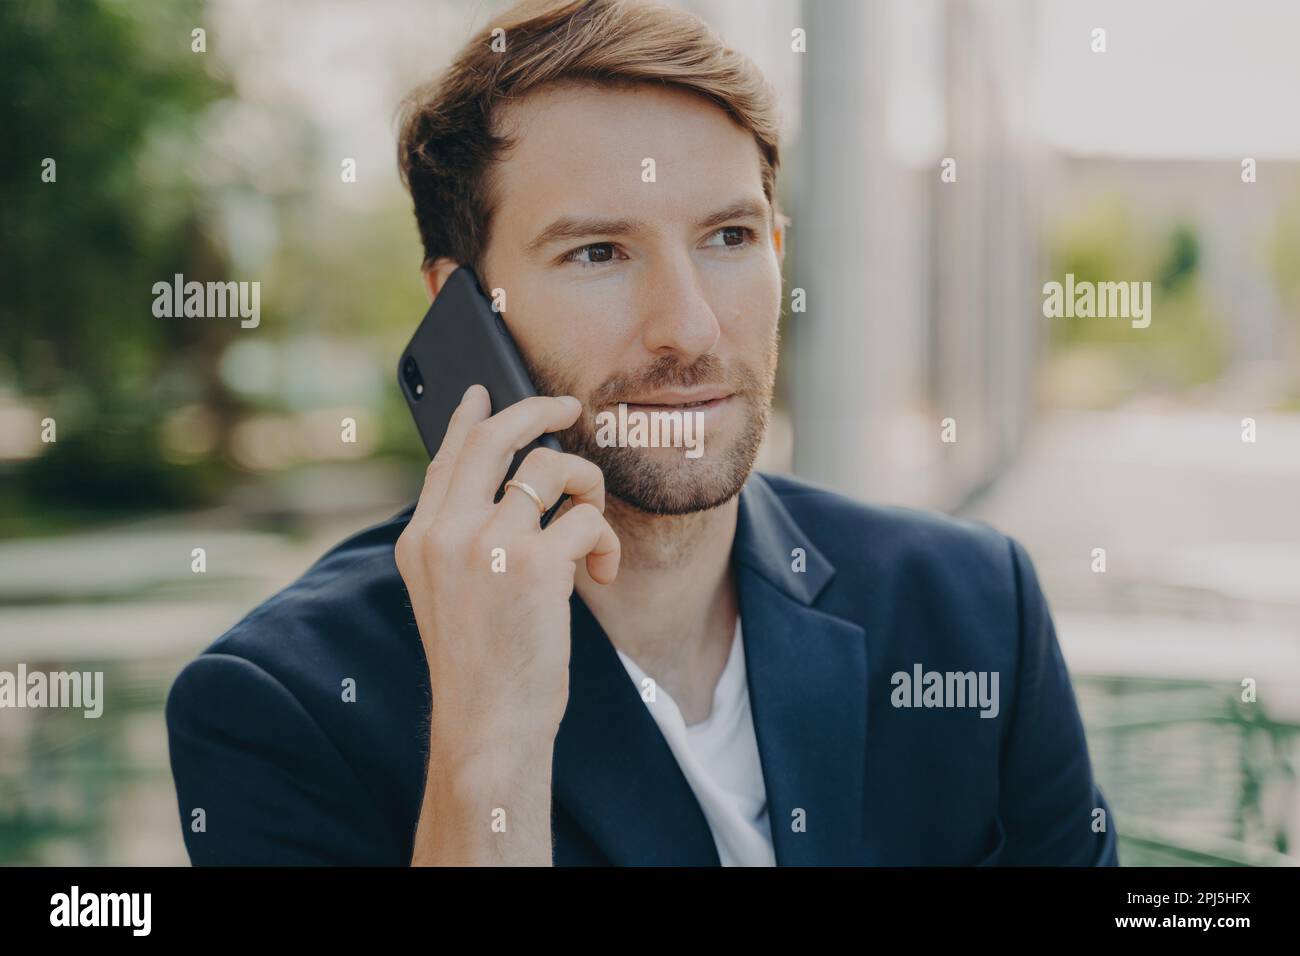 Horizontal shot of male entrepreneur or manager consults client by telephone call discusses future project has self confident expression poses outdoor Stock Photo